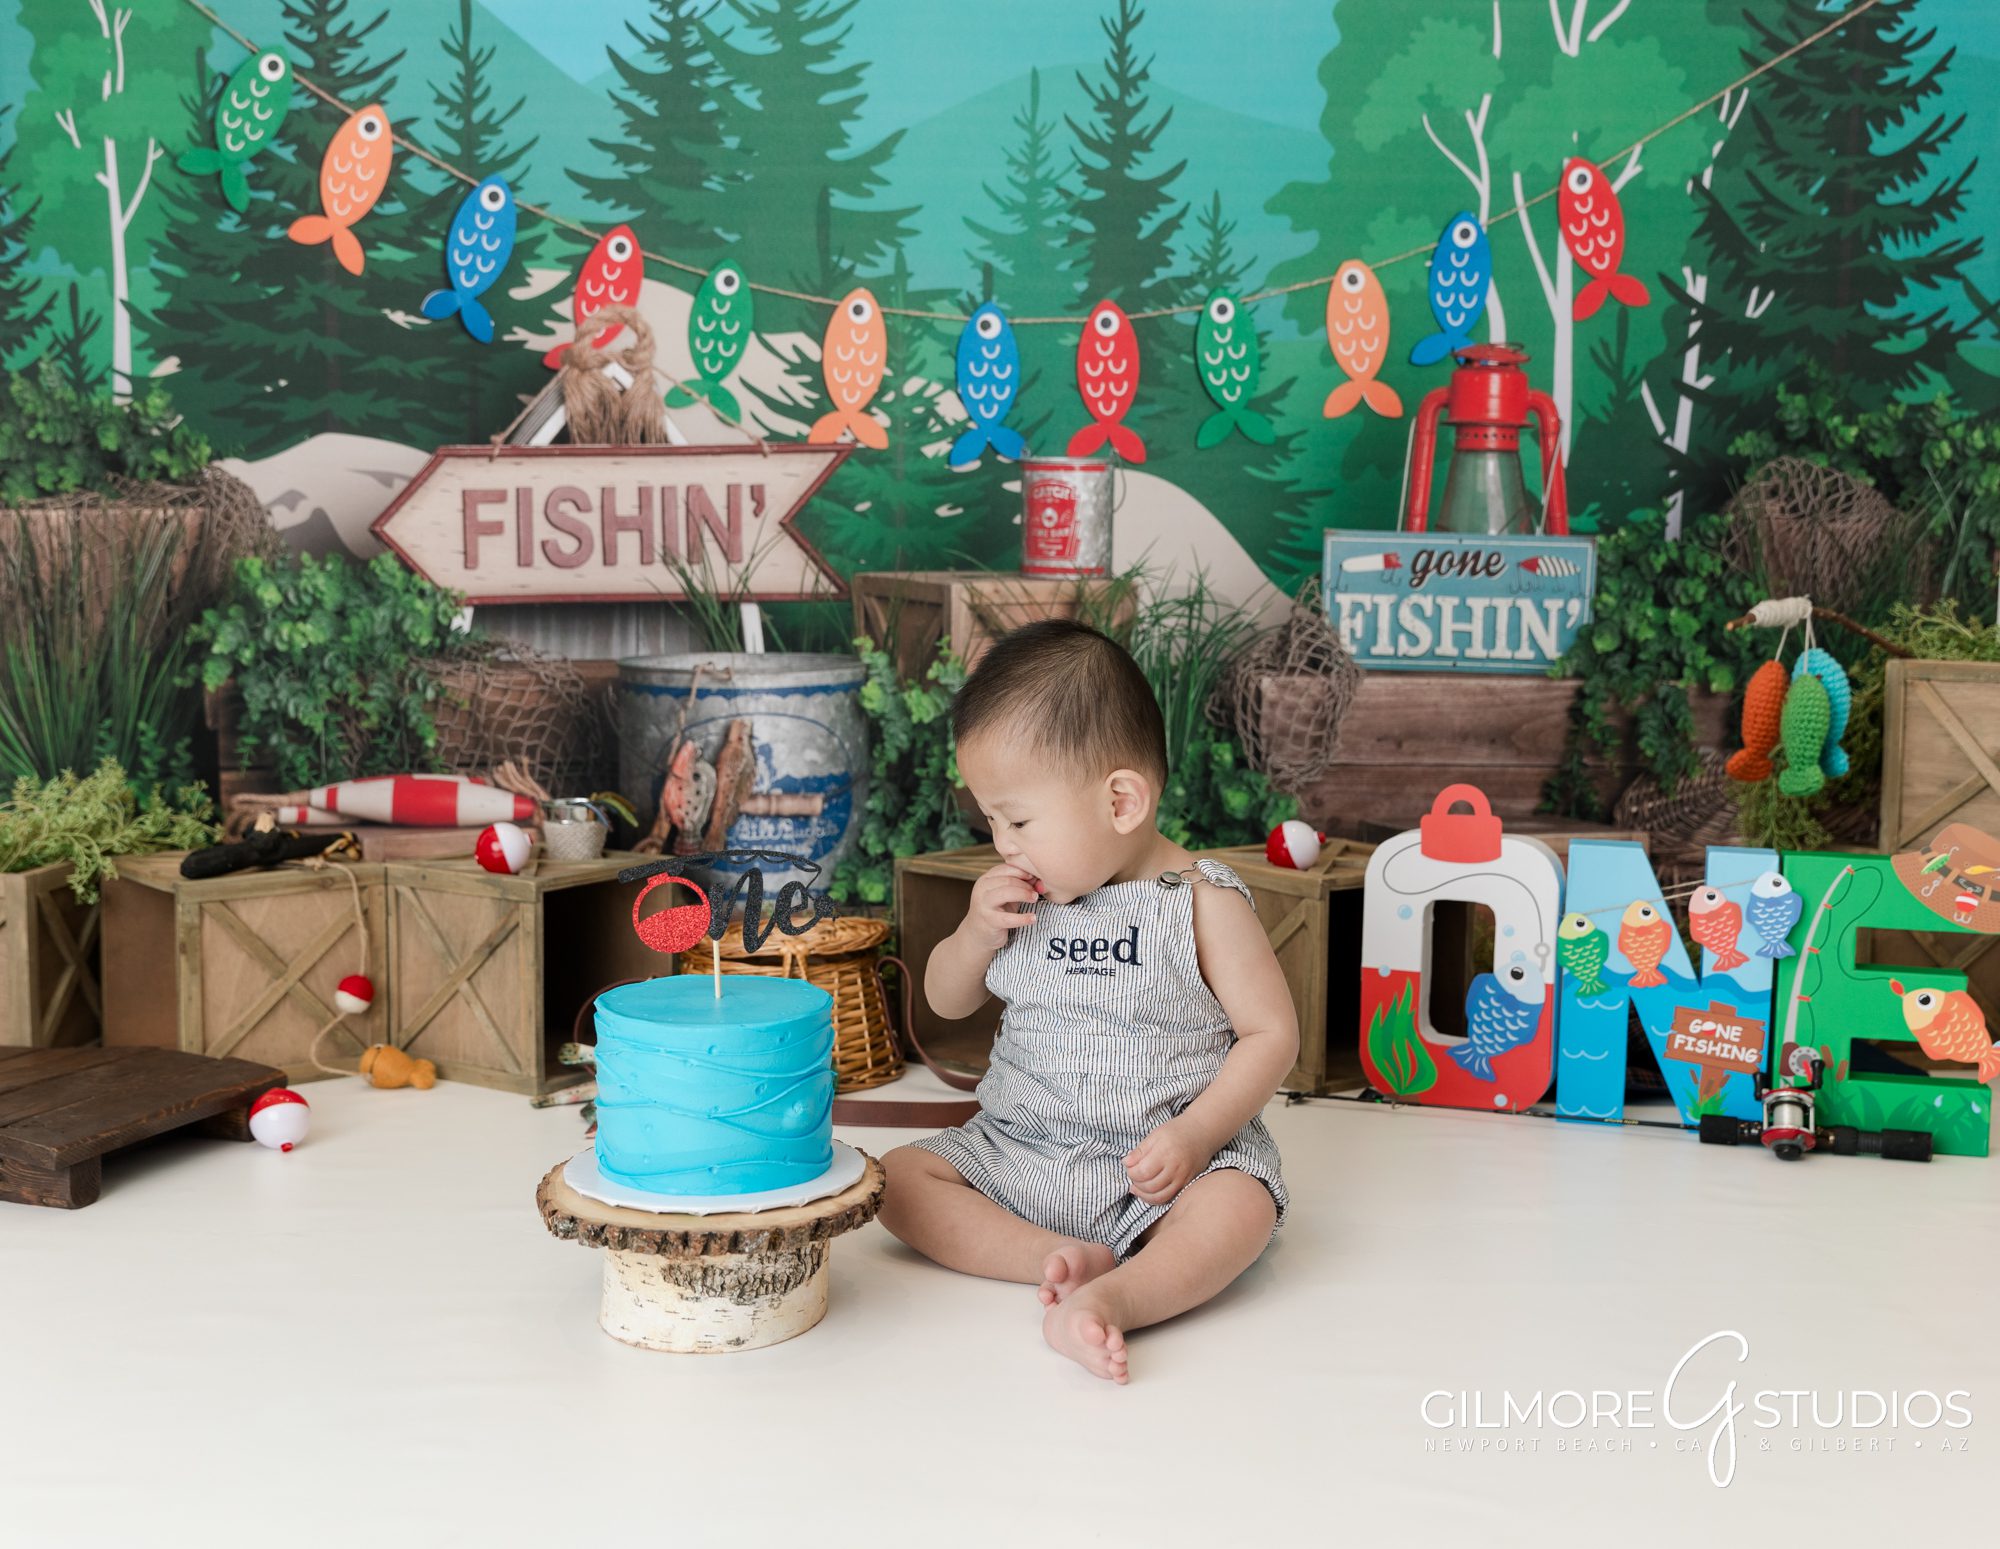 gilbert cake smash photographer, 1st birthday, east valley kids photography studio, gone fishin' first birthday photo session, fishing theme, one year old, cakes for boys birthday party, blue cake, bobbers, fishing pole, cute forest camping theme for boys